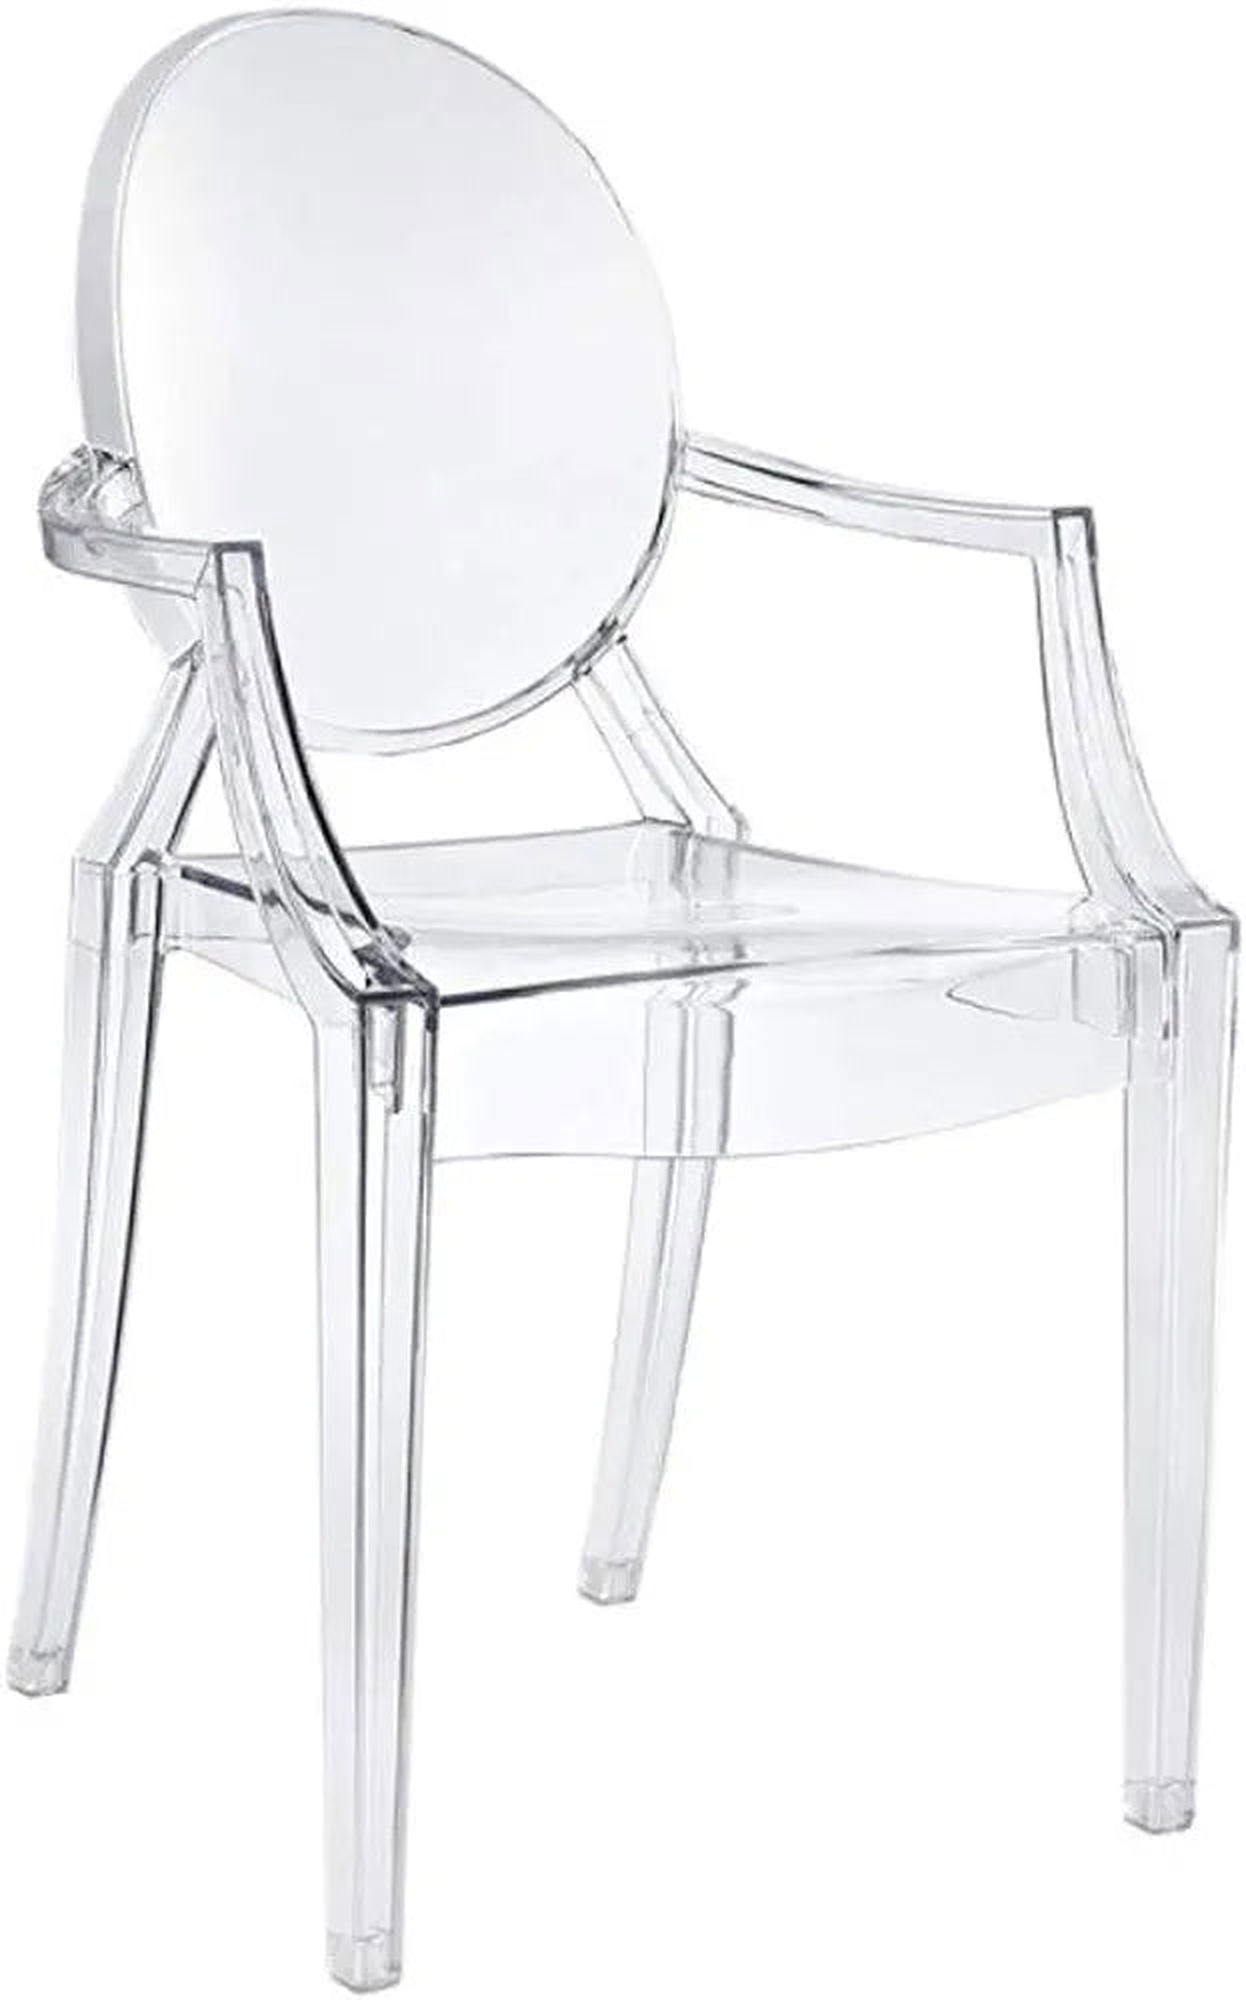 Dining chair - Transparent color